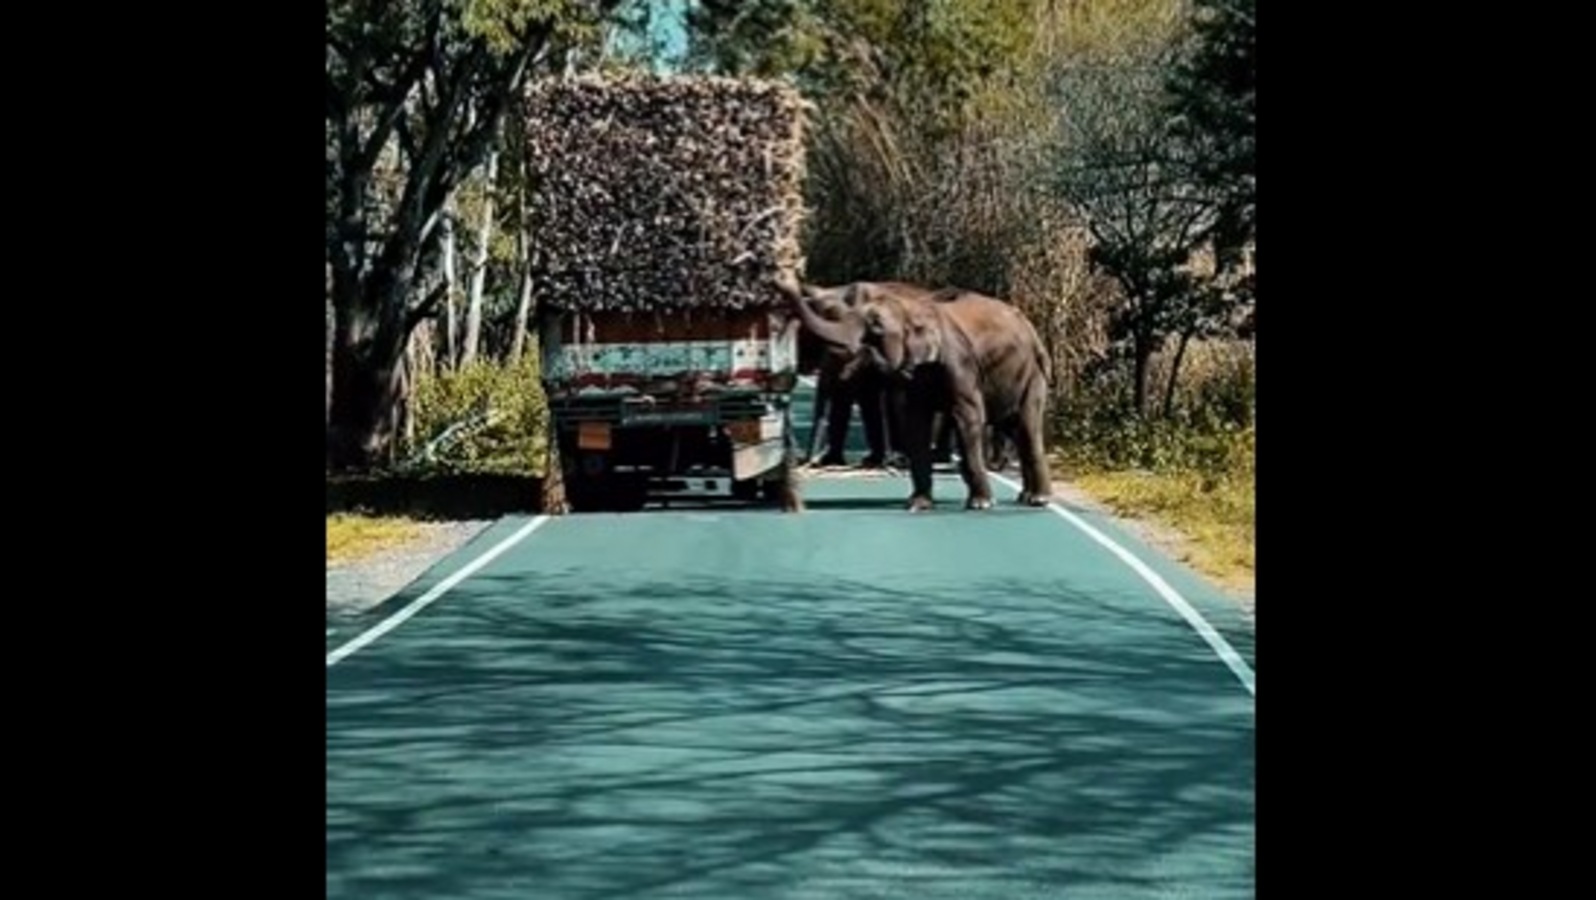 elephants-eat-sugarcane-from-loaded-truck-ifs-officer-shares-video-with-funny-caption